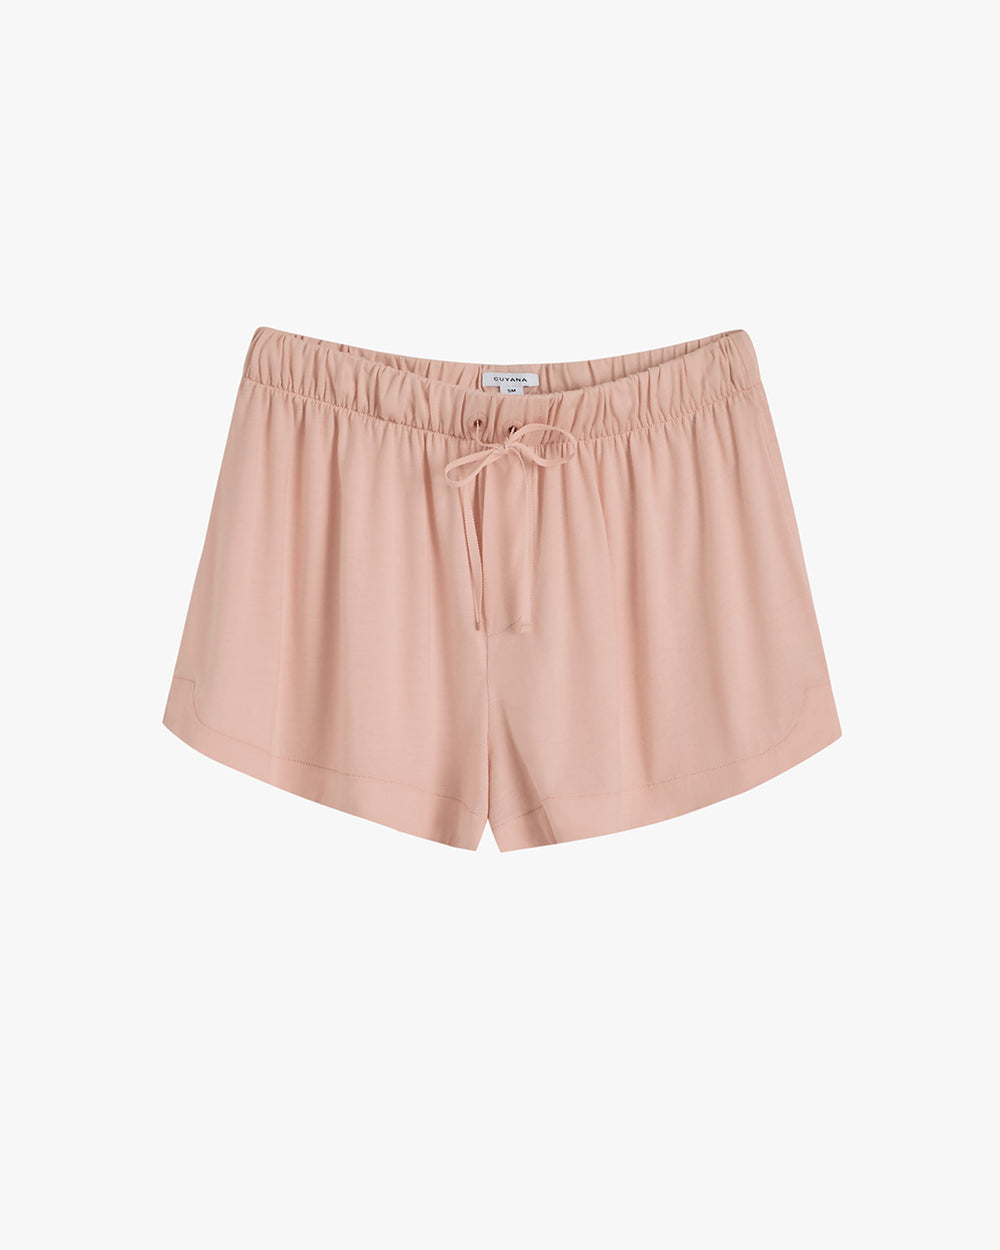 Shorts with elastic waistband and front tie detail.